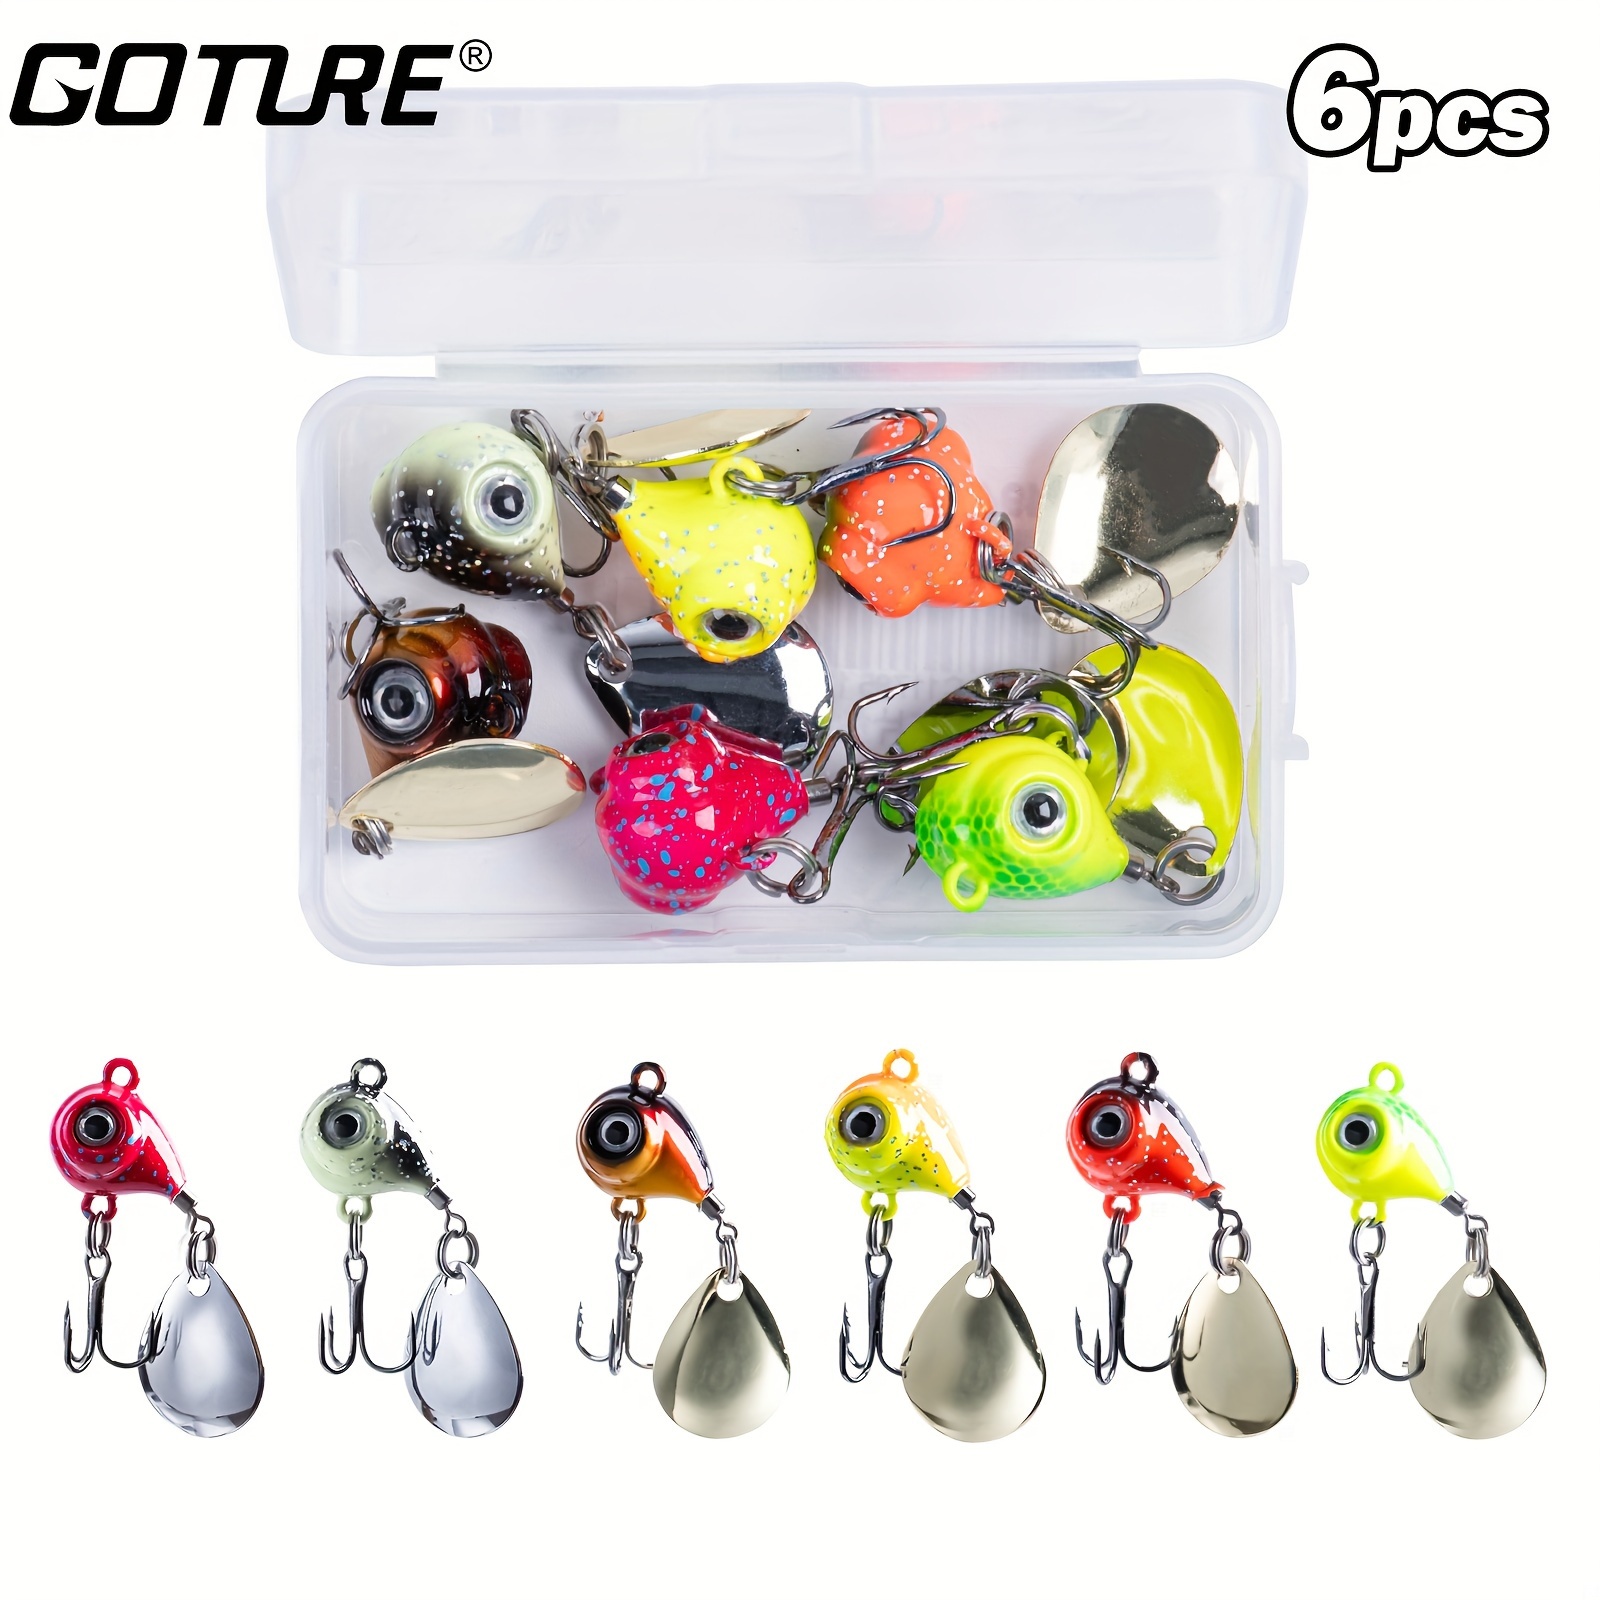 Goture Fishing Spoons Lures,Metal Spoon Trout Lures,Long